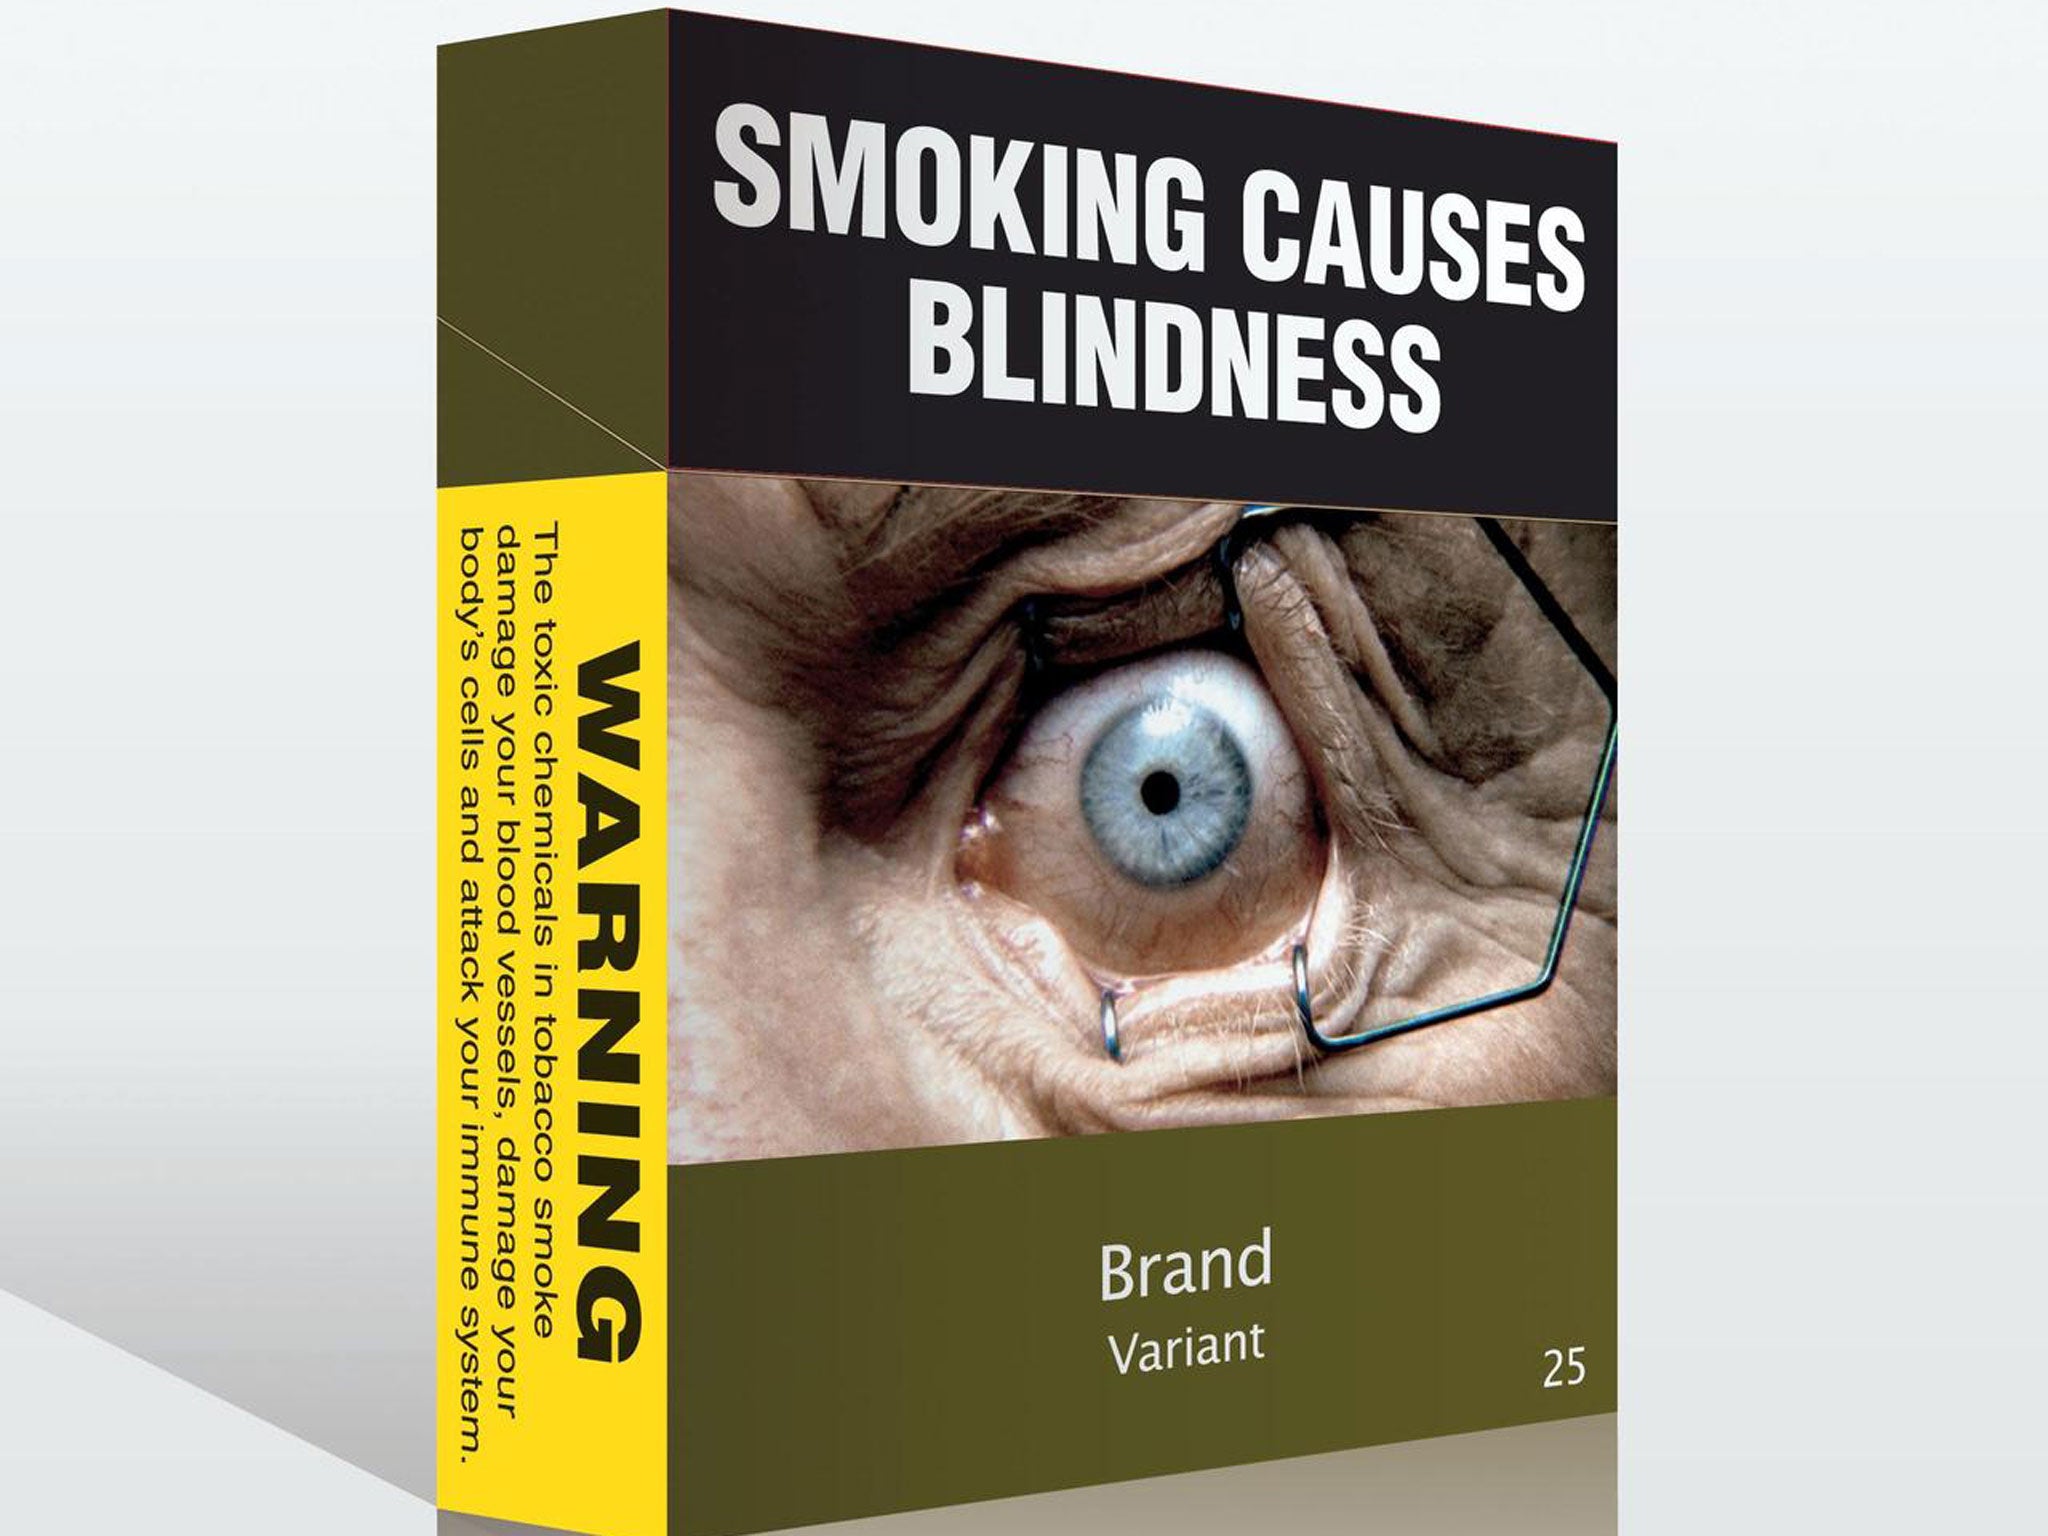 The Australian government has proposed these 'plain-packaged' cigarettes, which would be a world-first. Doctors in Britain have condemned the British government's delay in introducing similar plain packaging for tobacco products